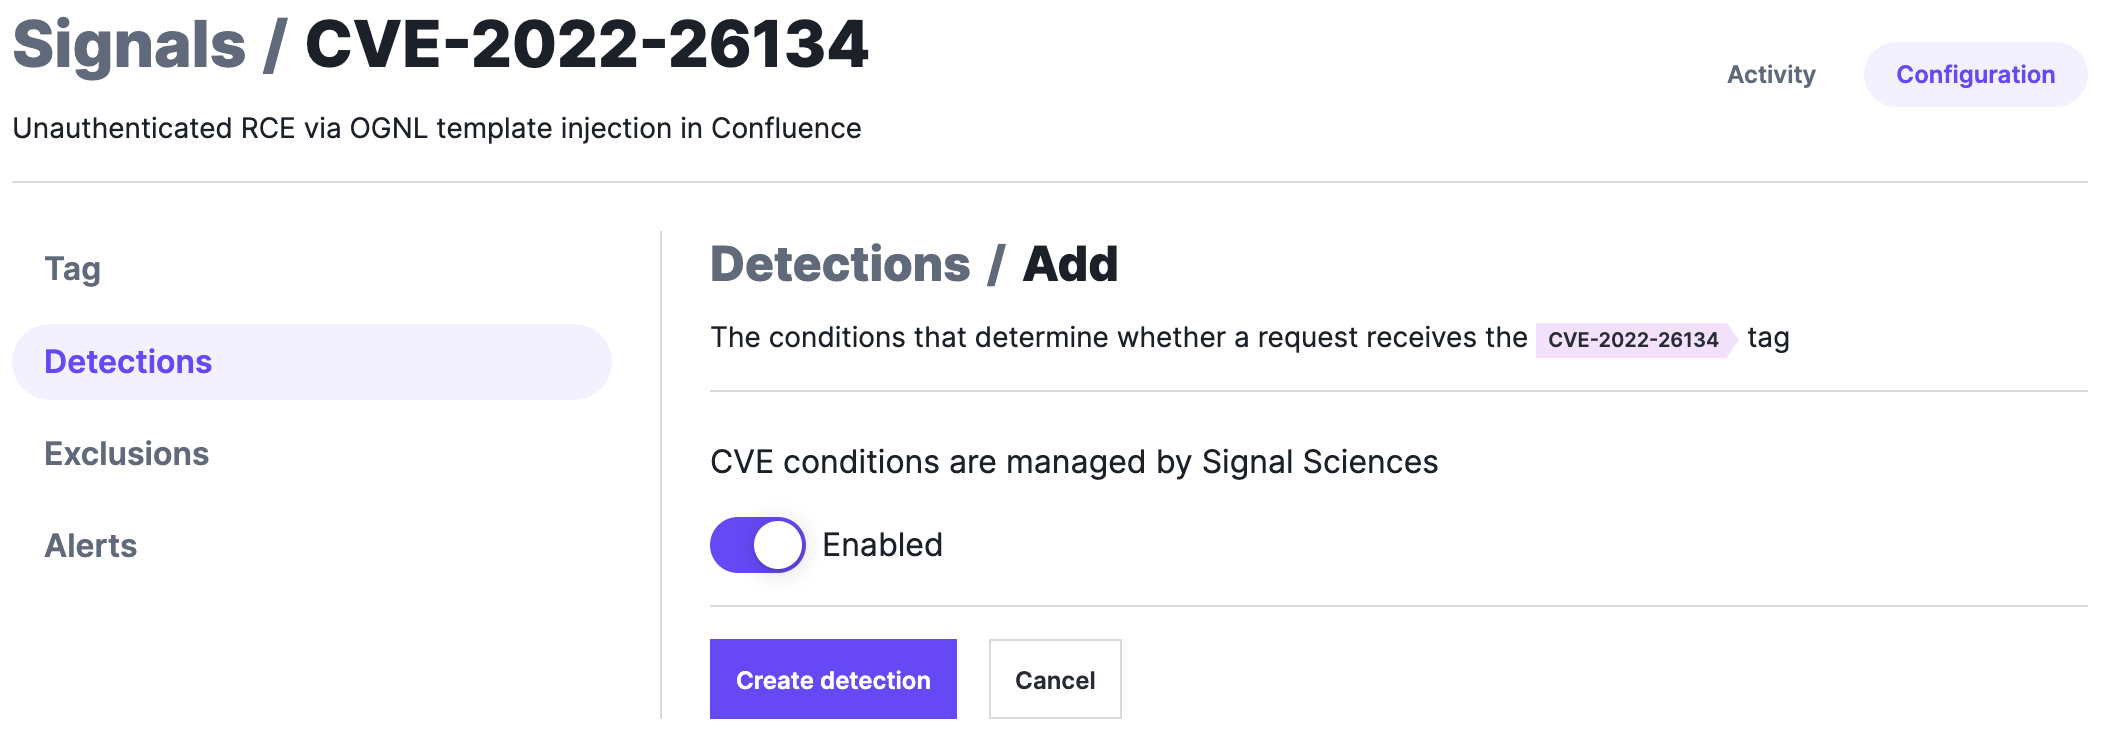 Add detection for the CVE-2022-26134 virtual patching rule.